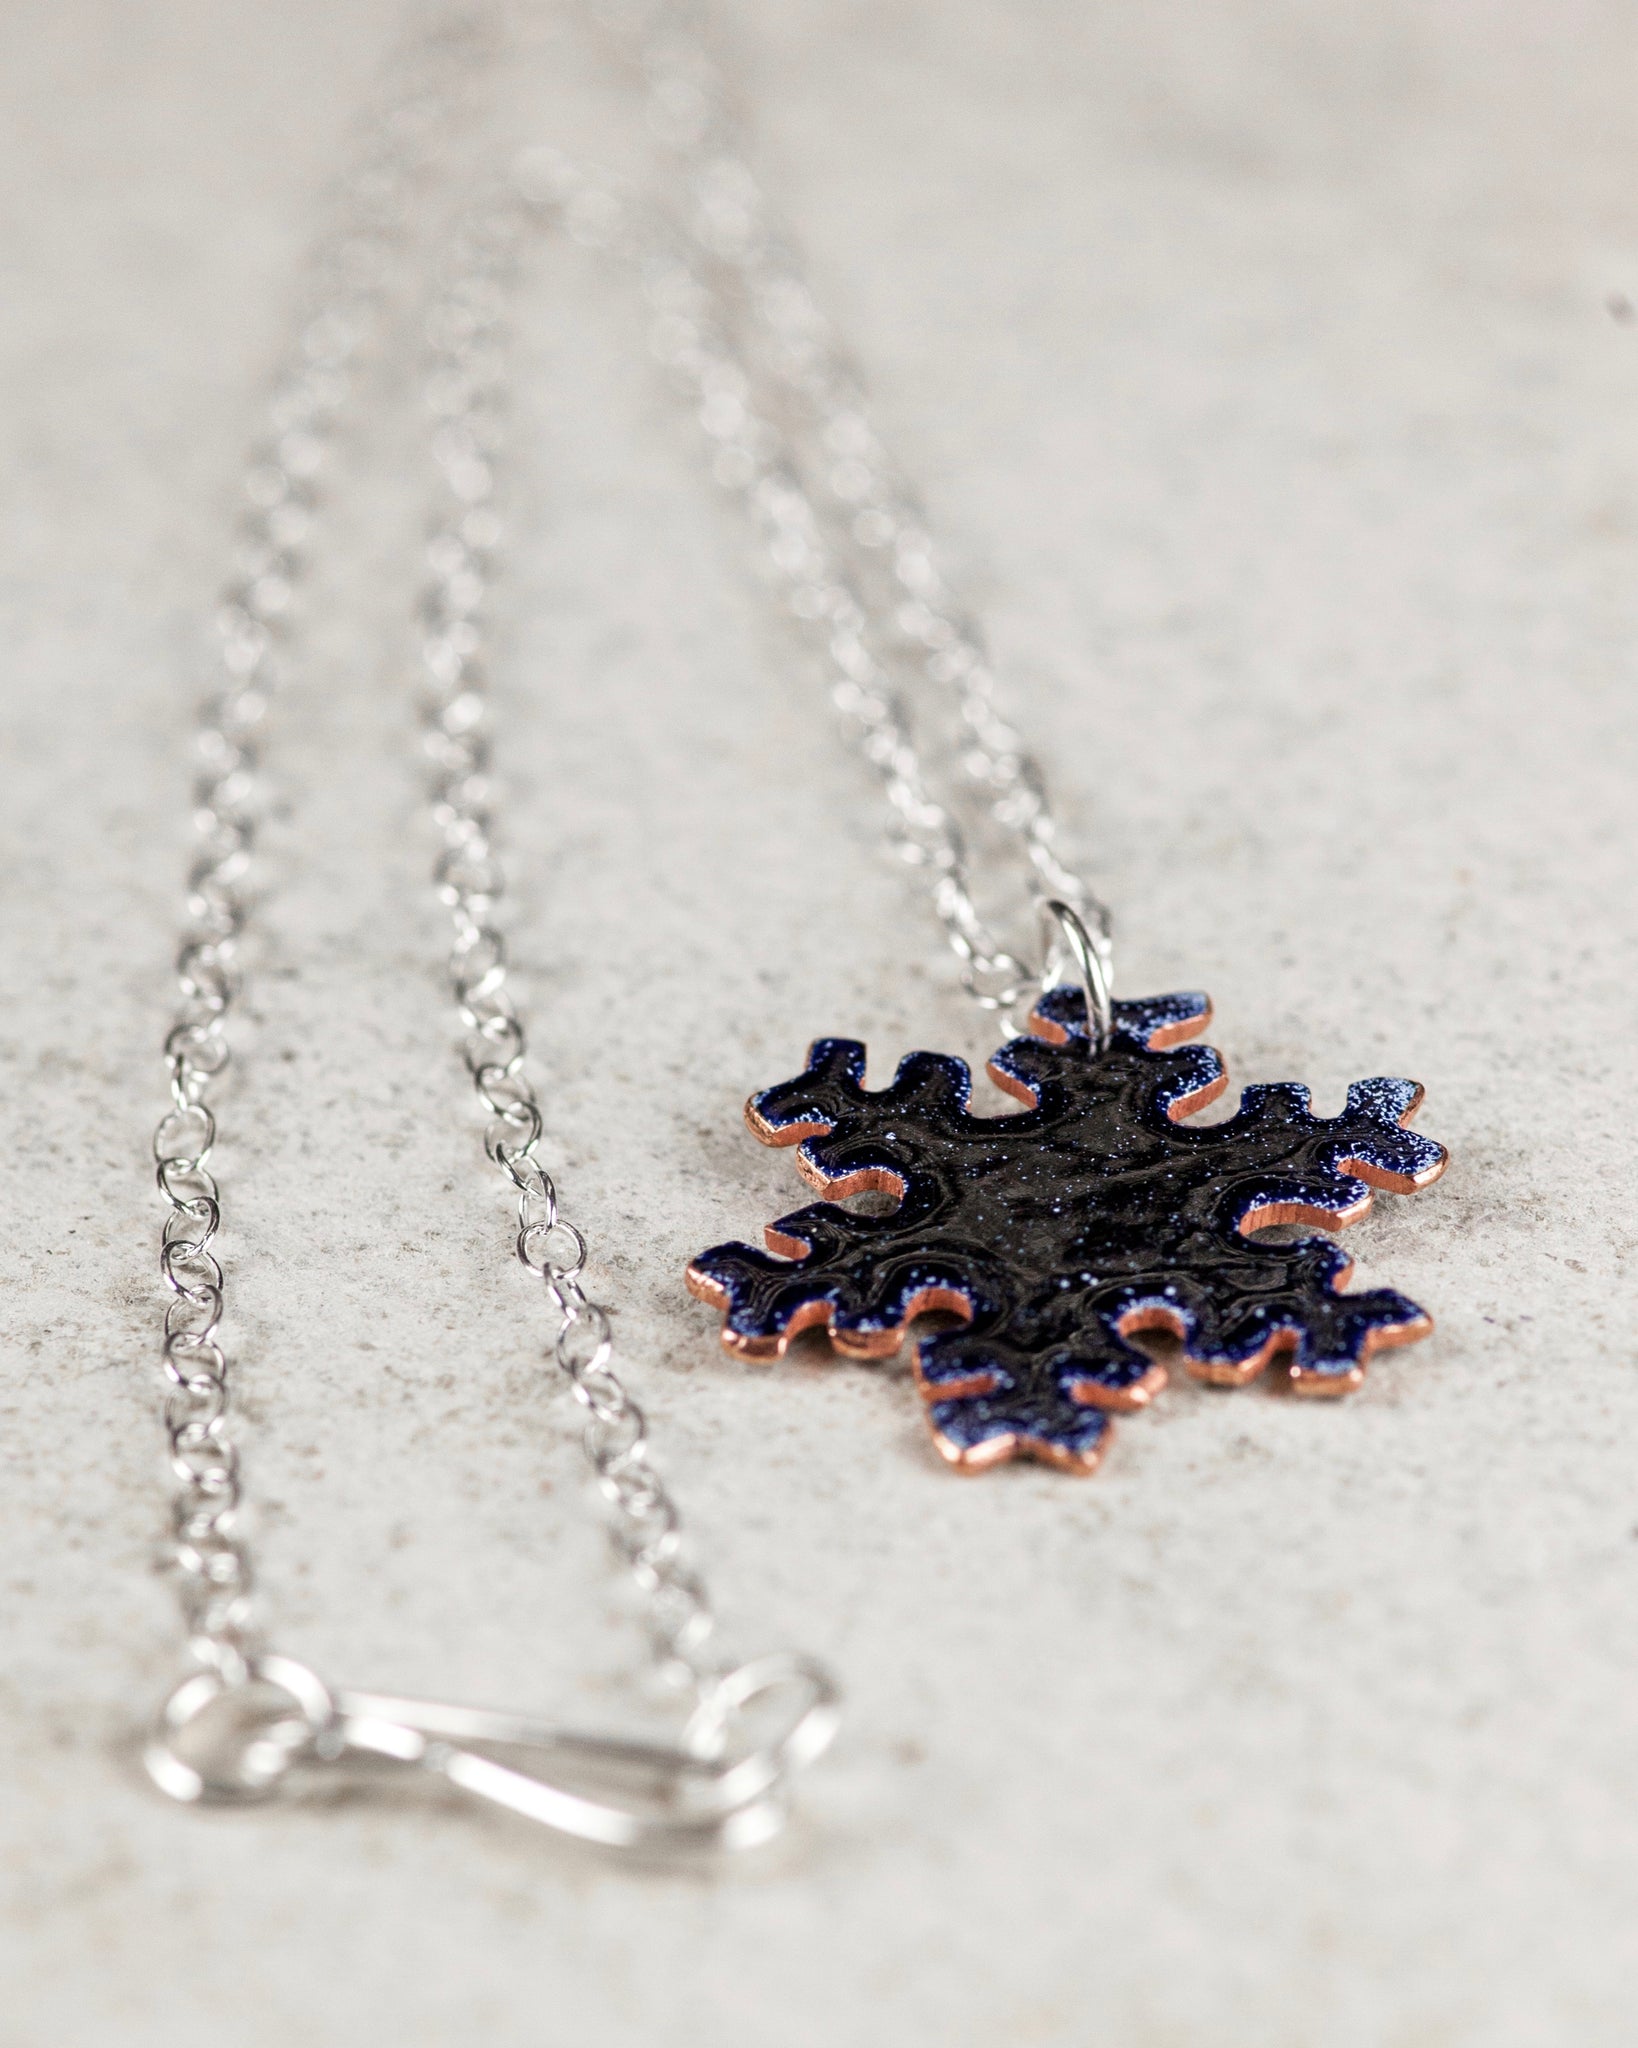 Reversible snow flake necklace